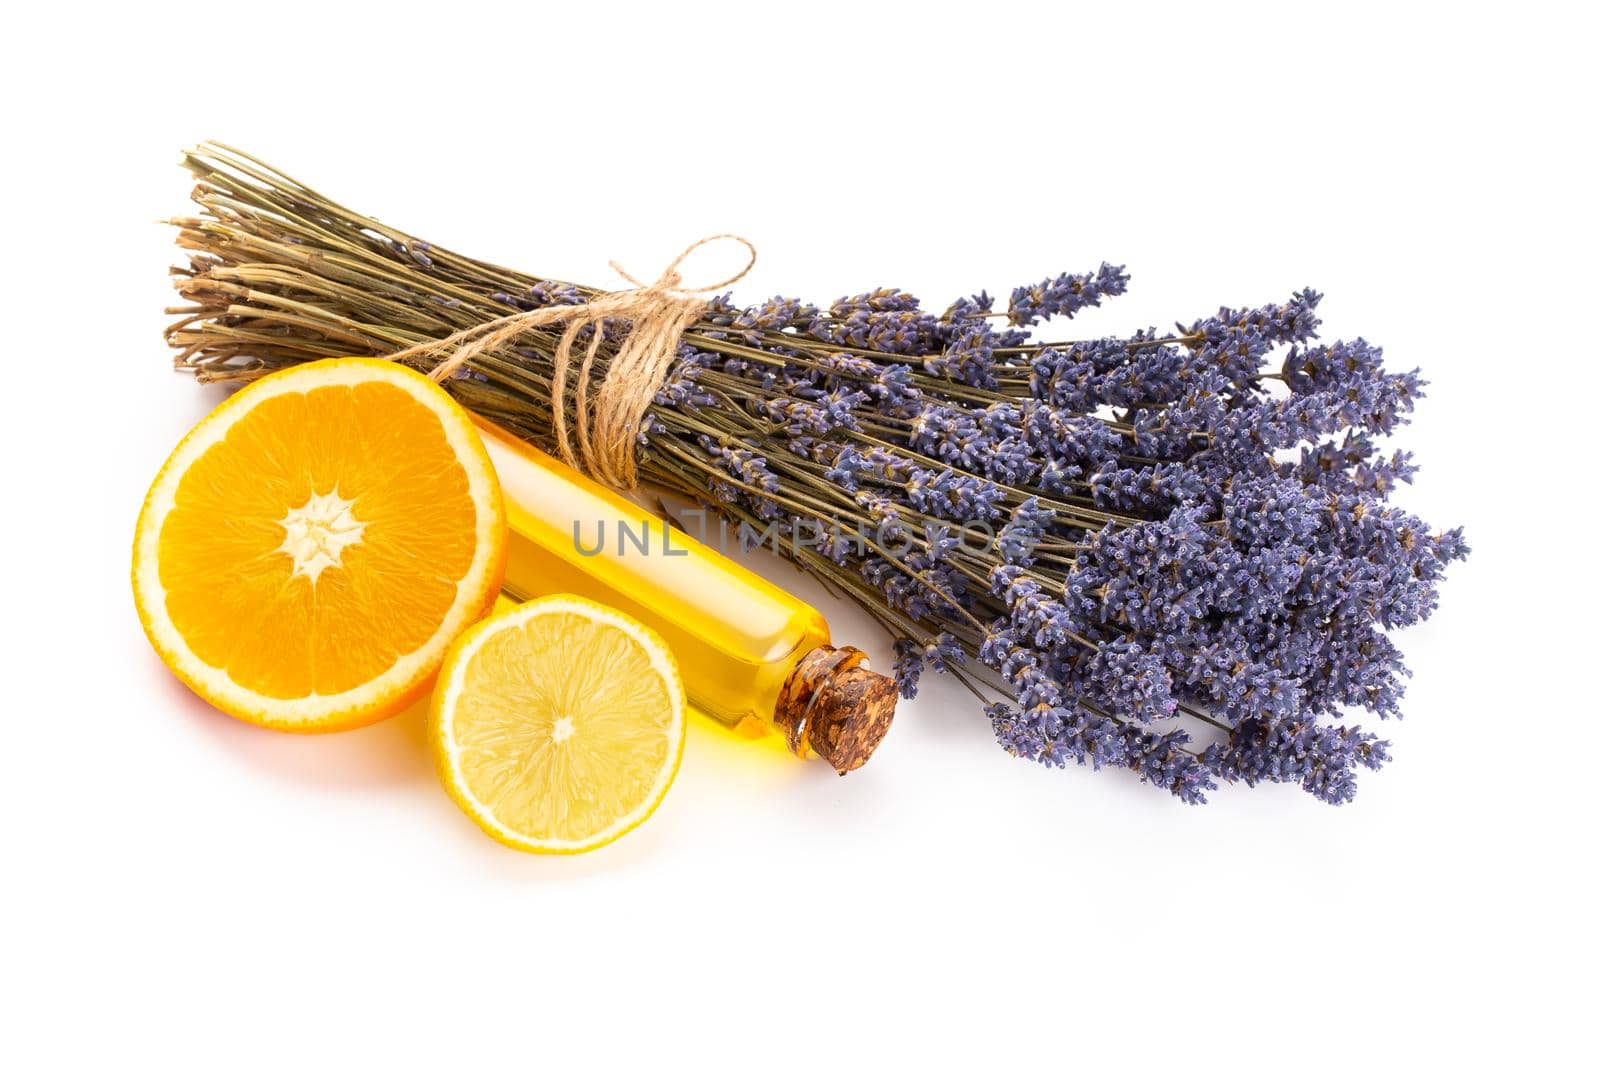 lavender spa products with dried lavender flowers on a isolated background. by gitusik